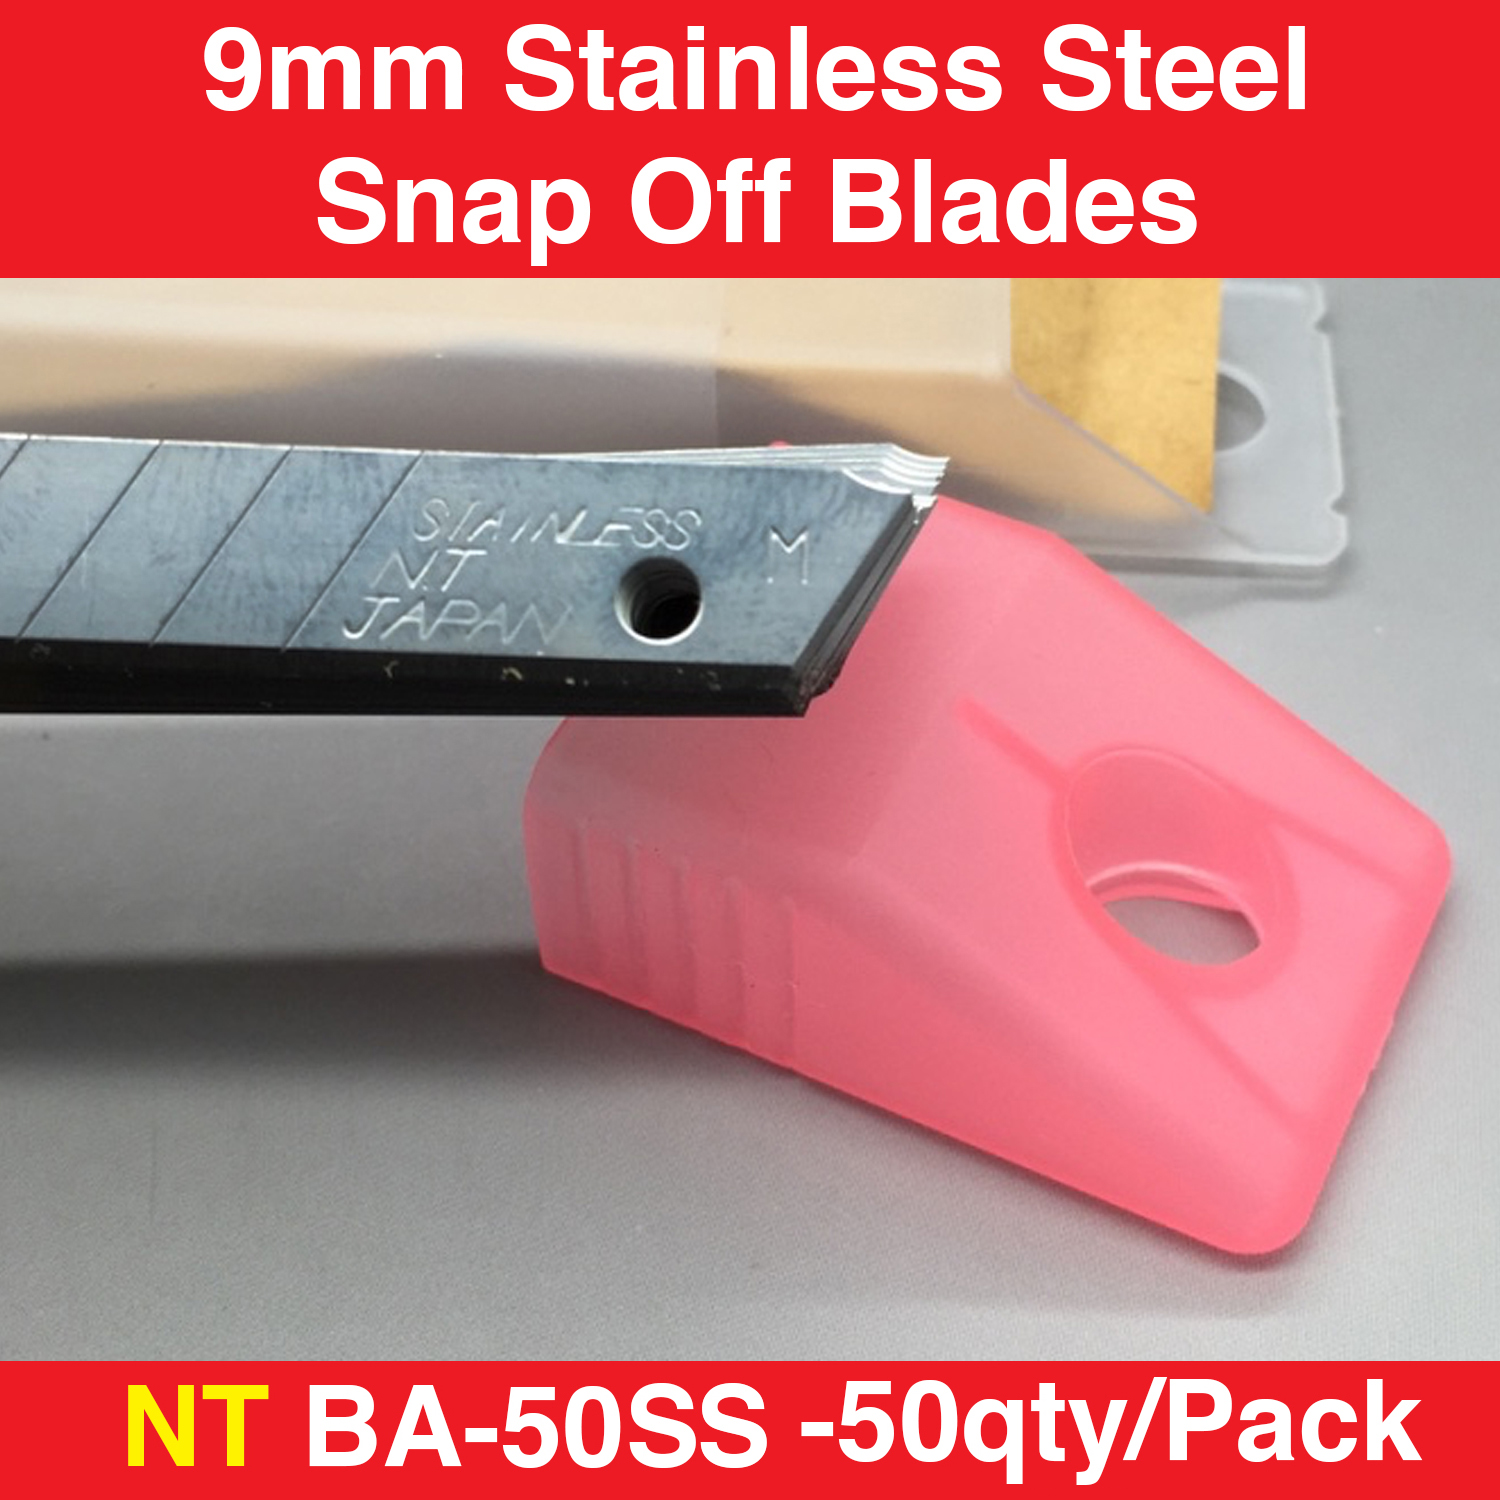 NT Cutter 9mm Stainless Steel Snap-Off Blades, 50-Blade/Pack, 1 Pack  (BA-50SS) 